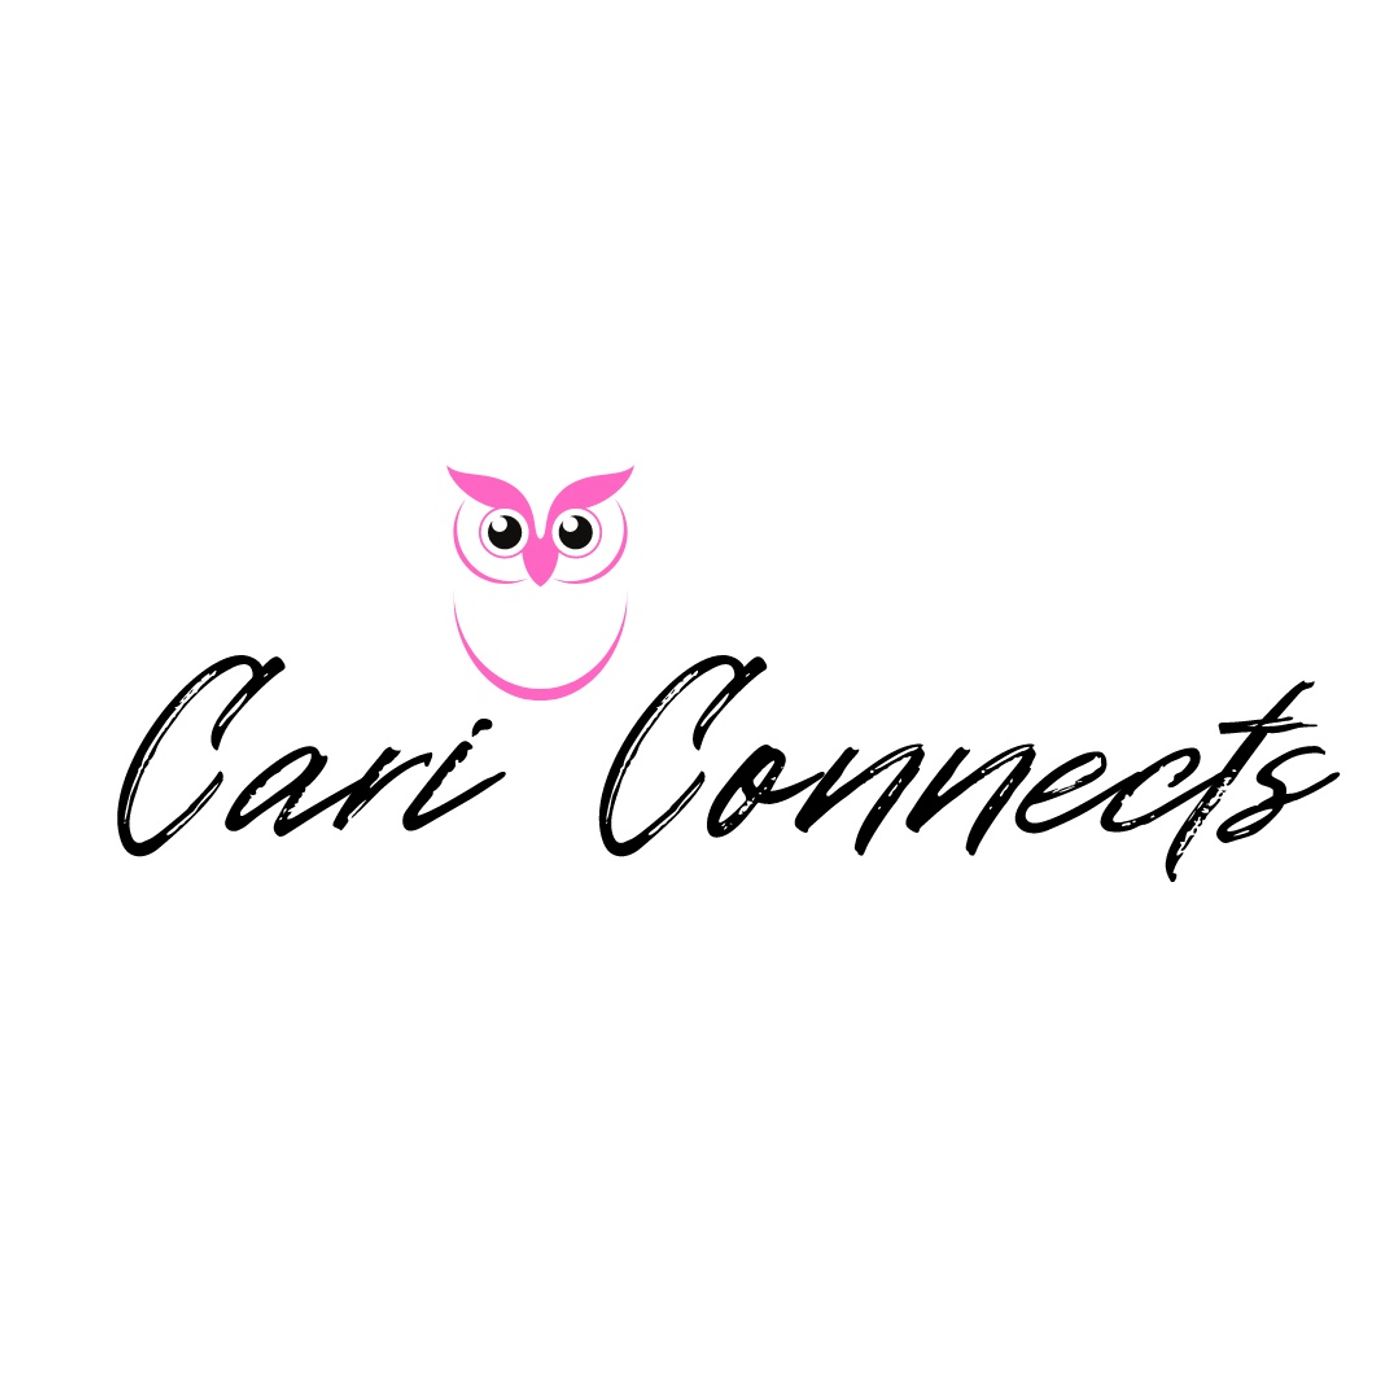 Cari Connects March 21st